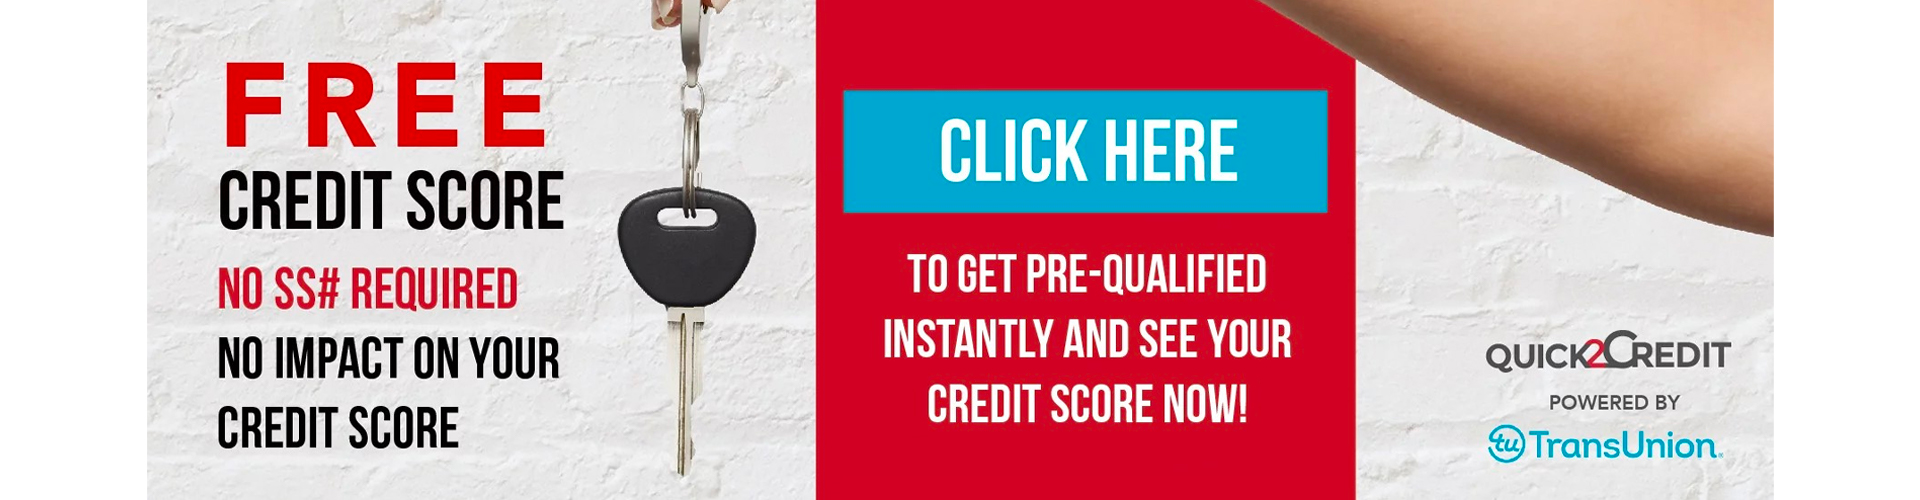 Click Here to get pre-qualified and see your credit score